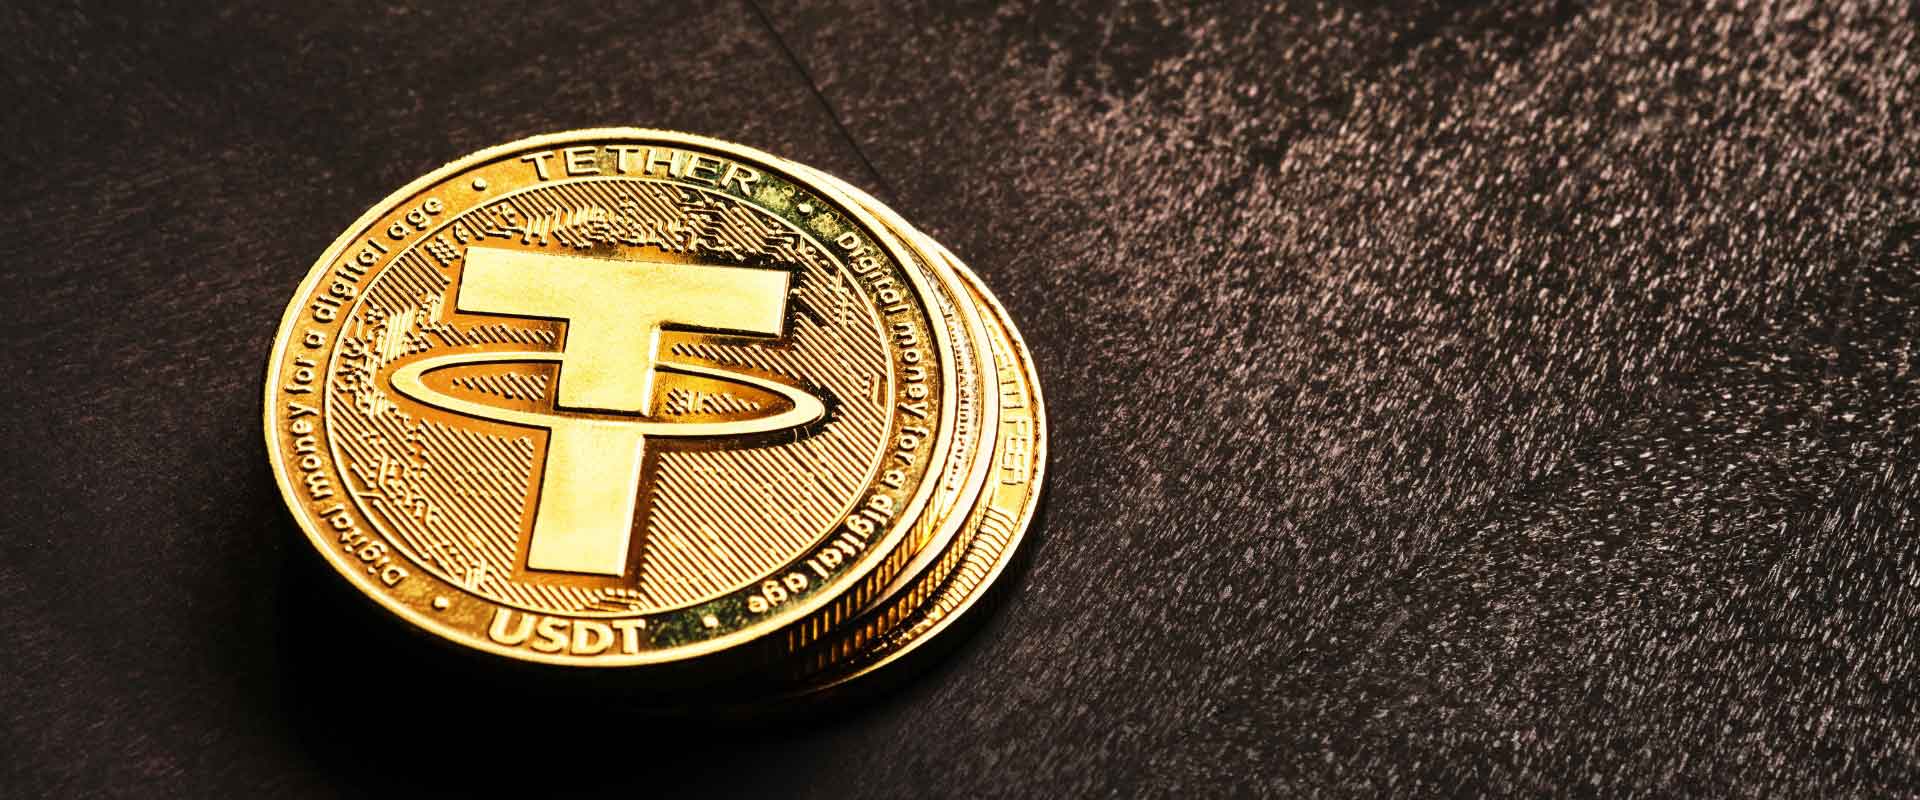 stack of gold coins with logo of tether gold